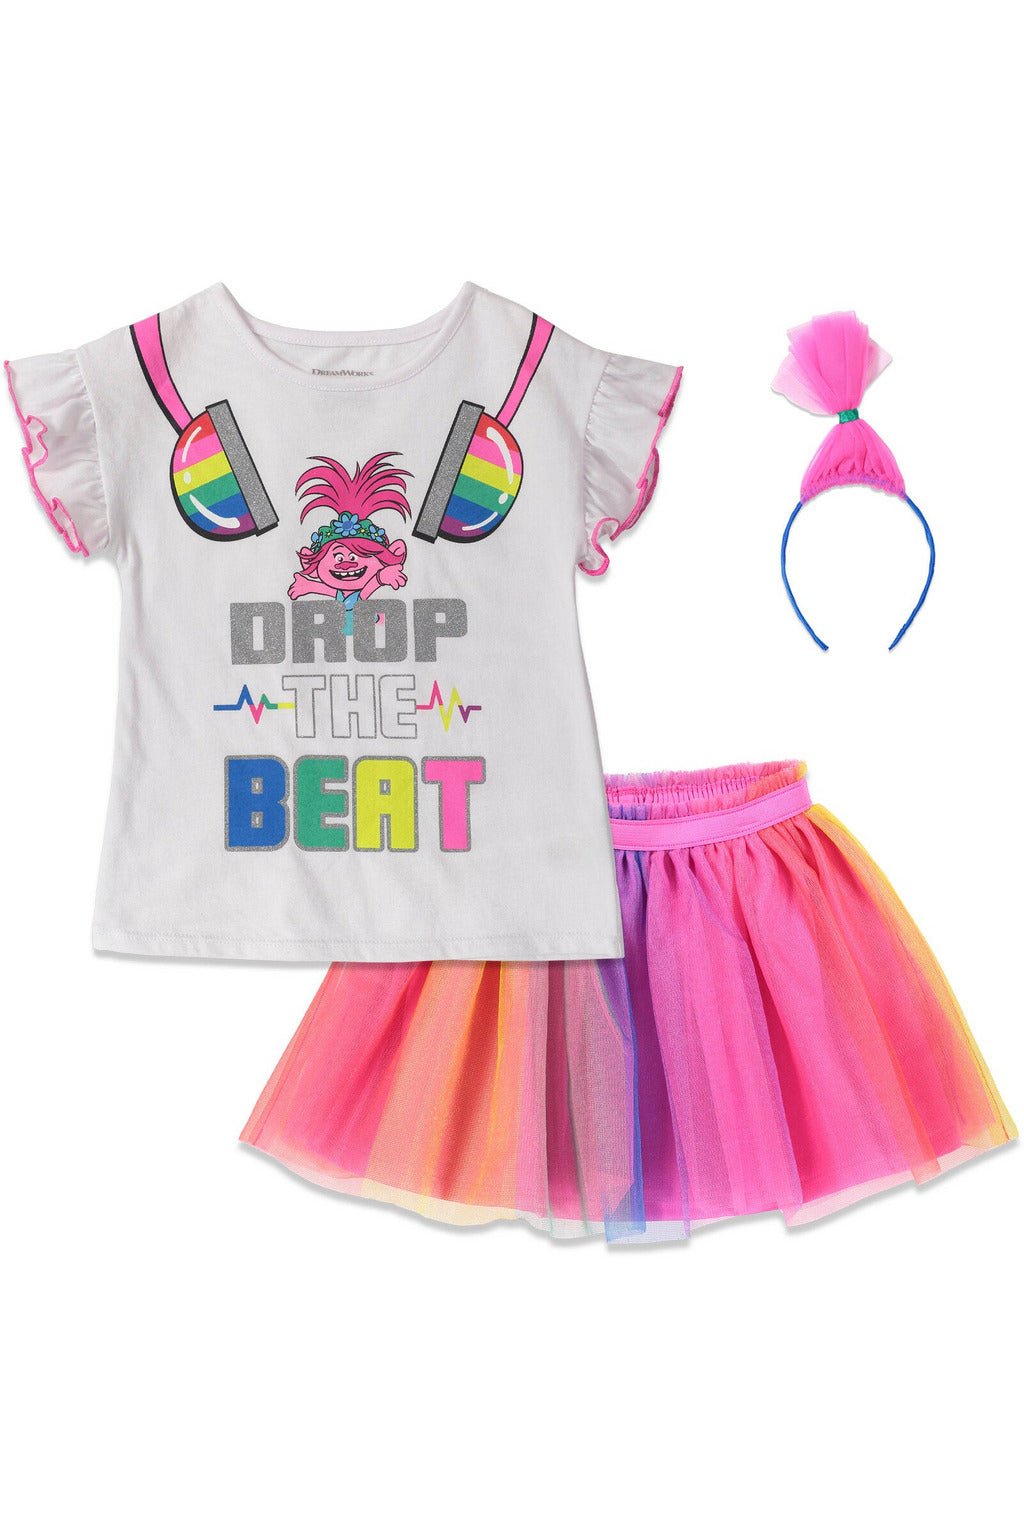 DreamWorks Poppy T-Shirt Tulle Skirt and Headband 3 Piece Outfit Set - imagikids